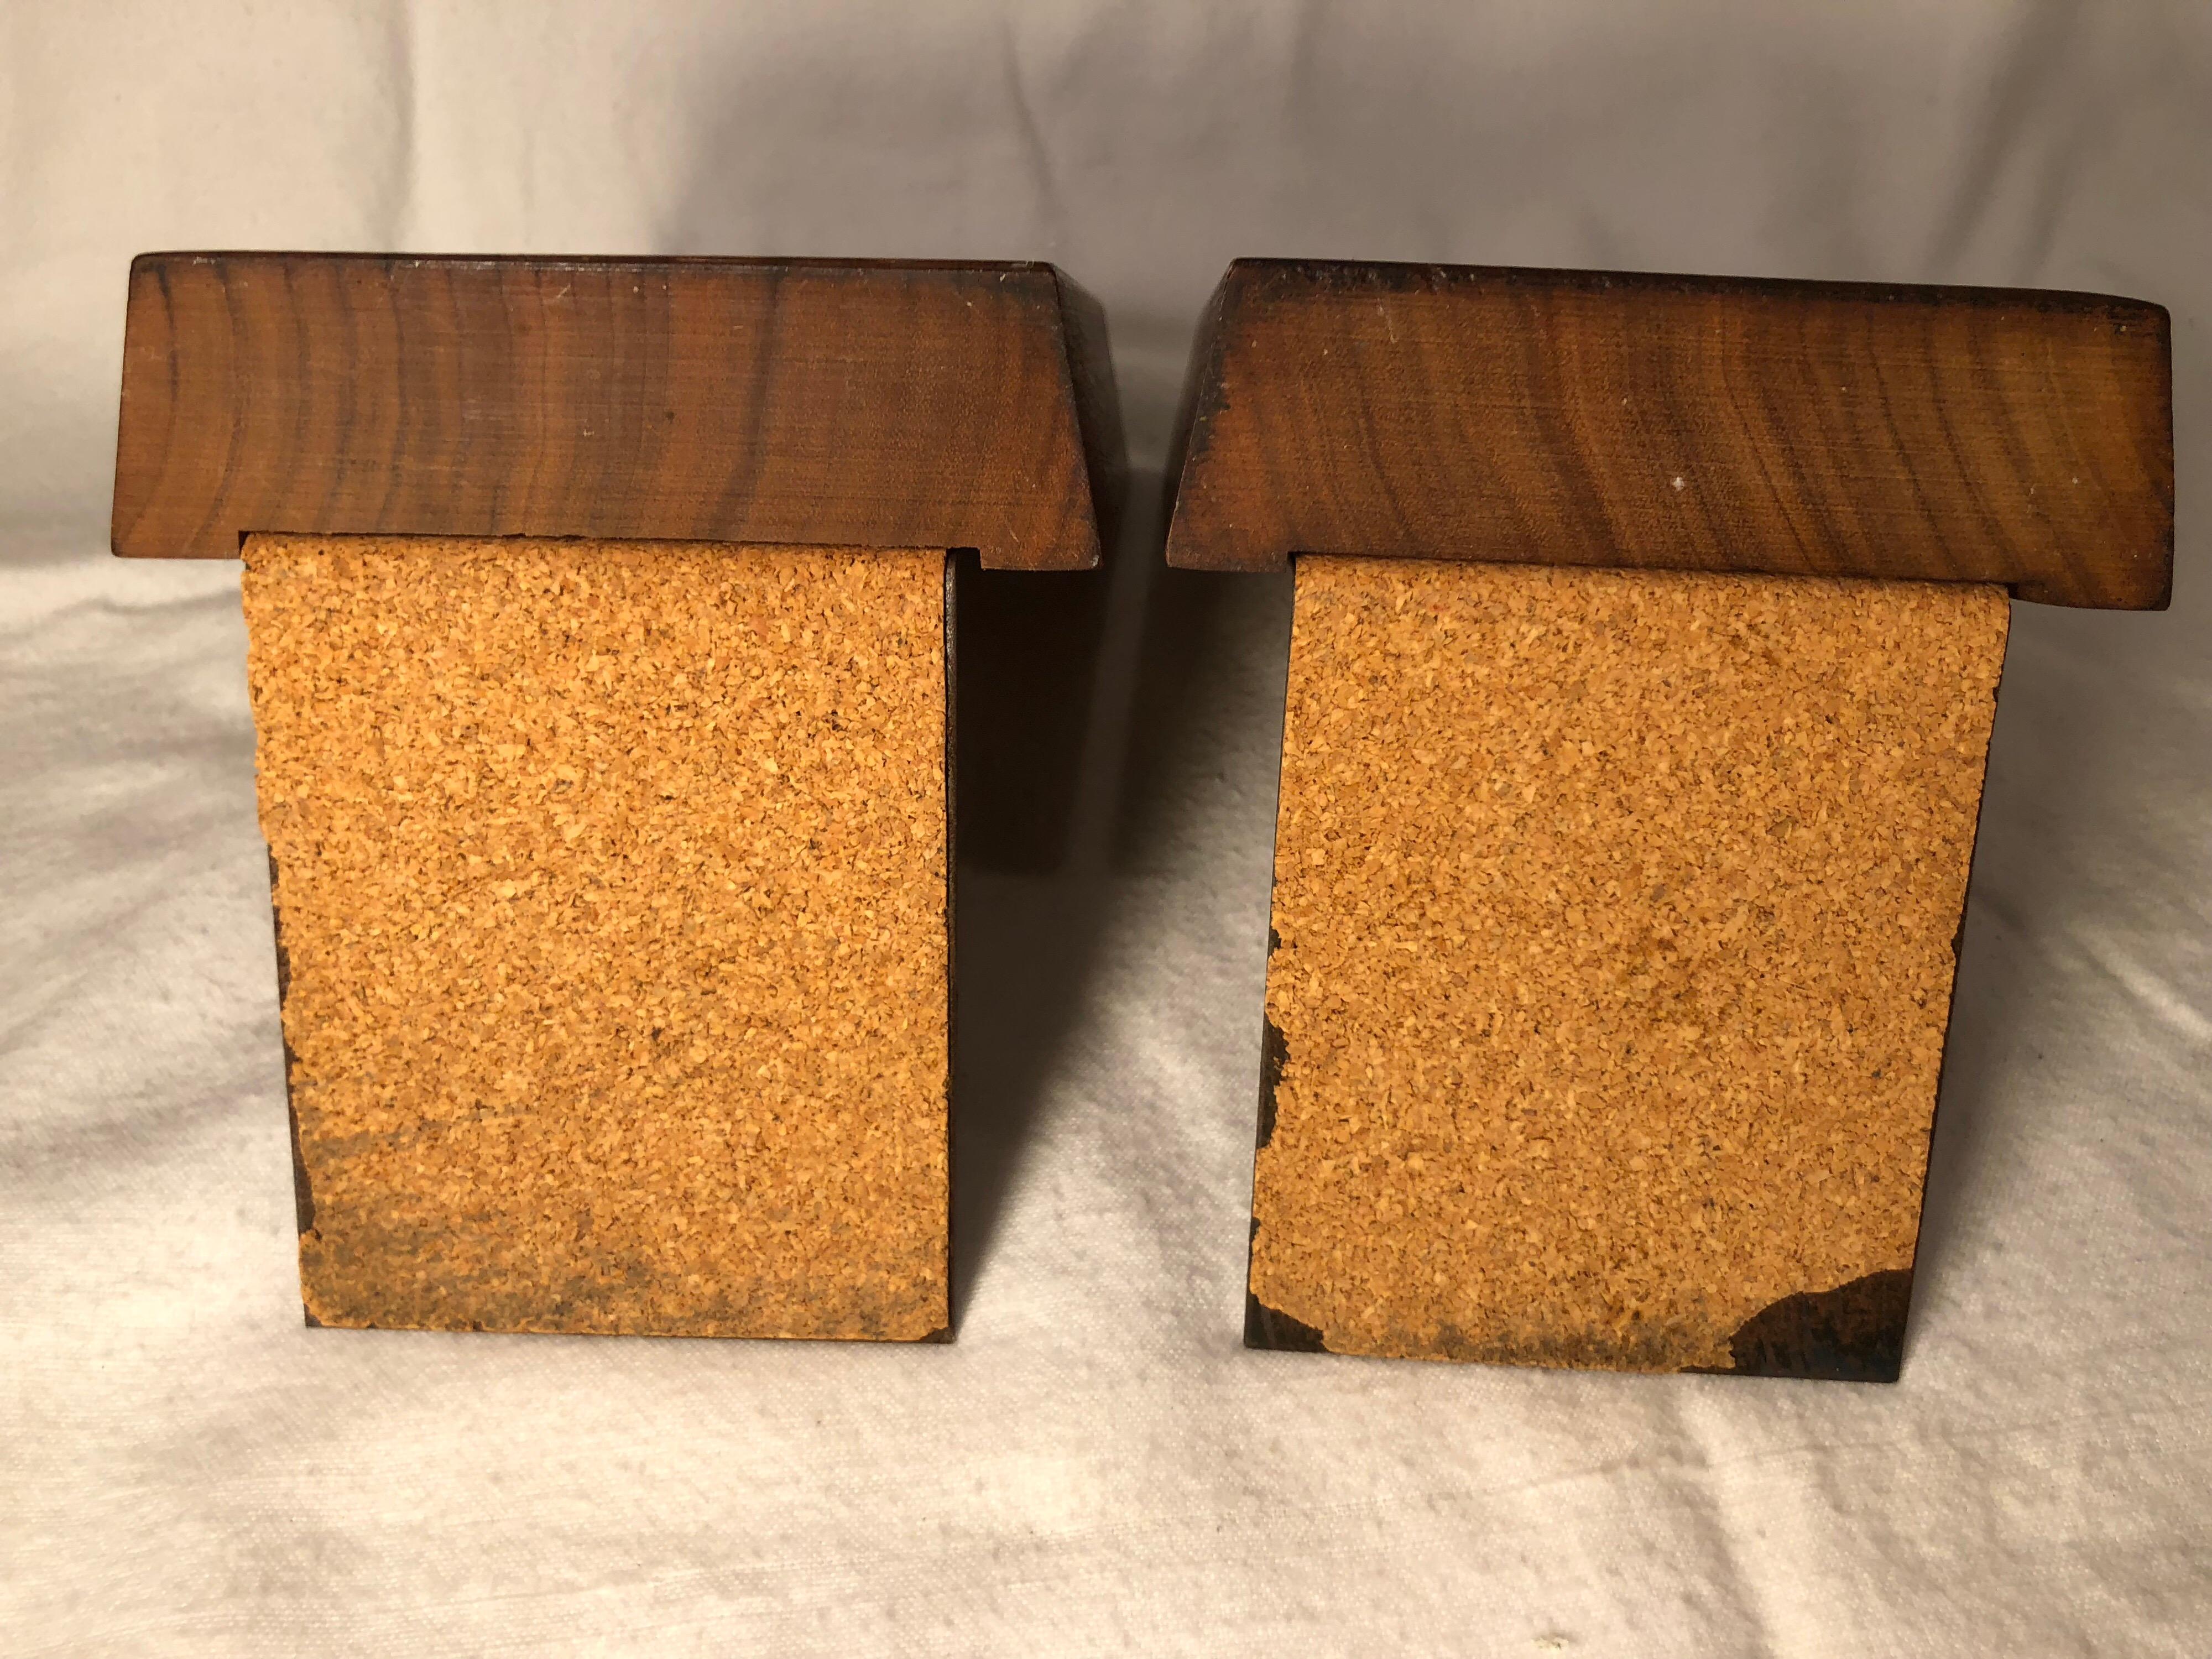 Pair of Mid-Century Modern Walnut and Enamel Bookends by Ernest John For Sale 6